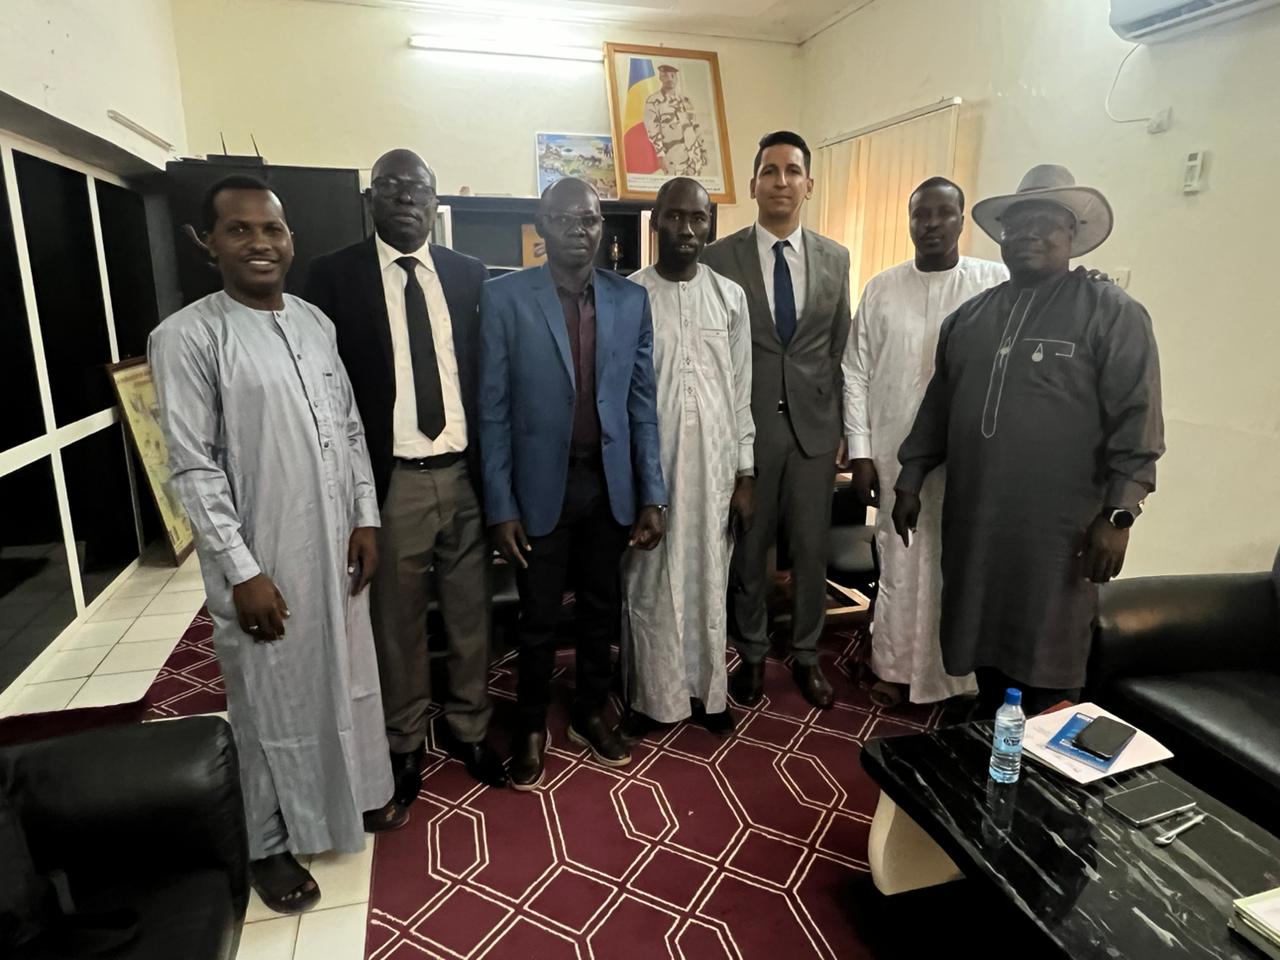 Meeting with H.E. Mr. Mahamat A. HANNO, Minister of the Environment, Fisheries and Sustainable Development of Chad 